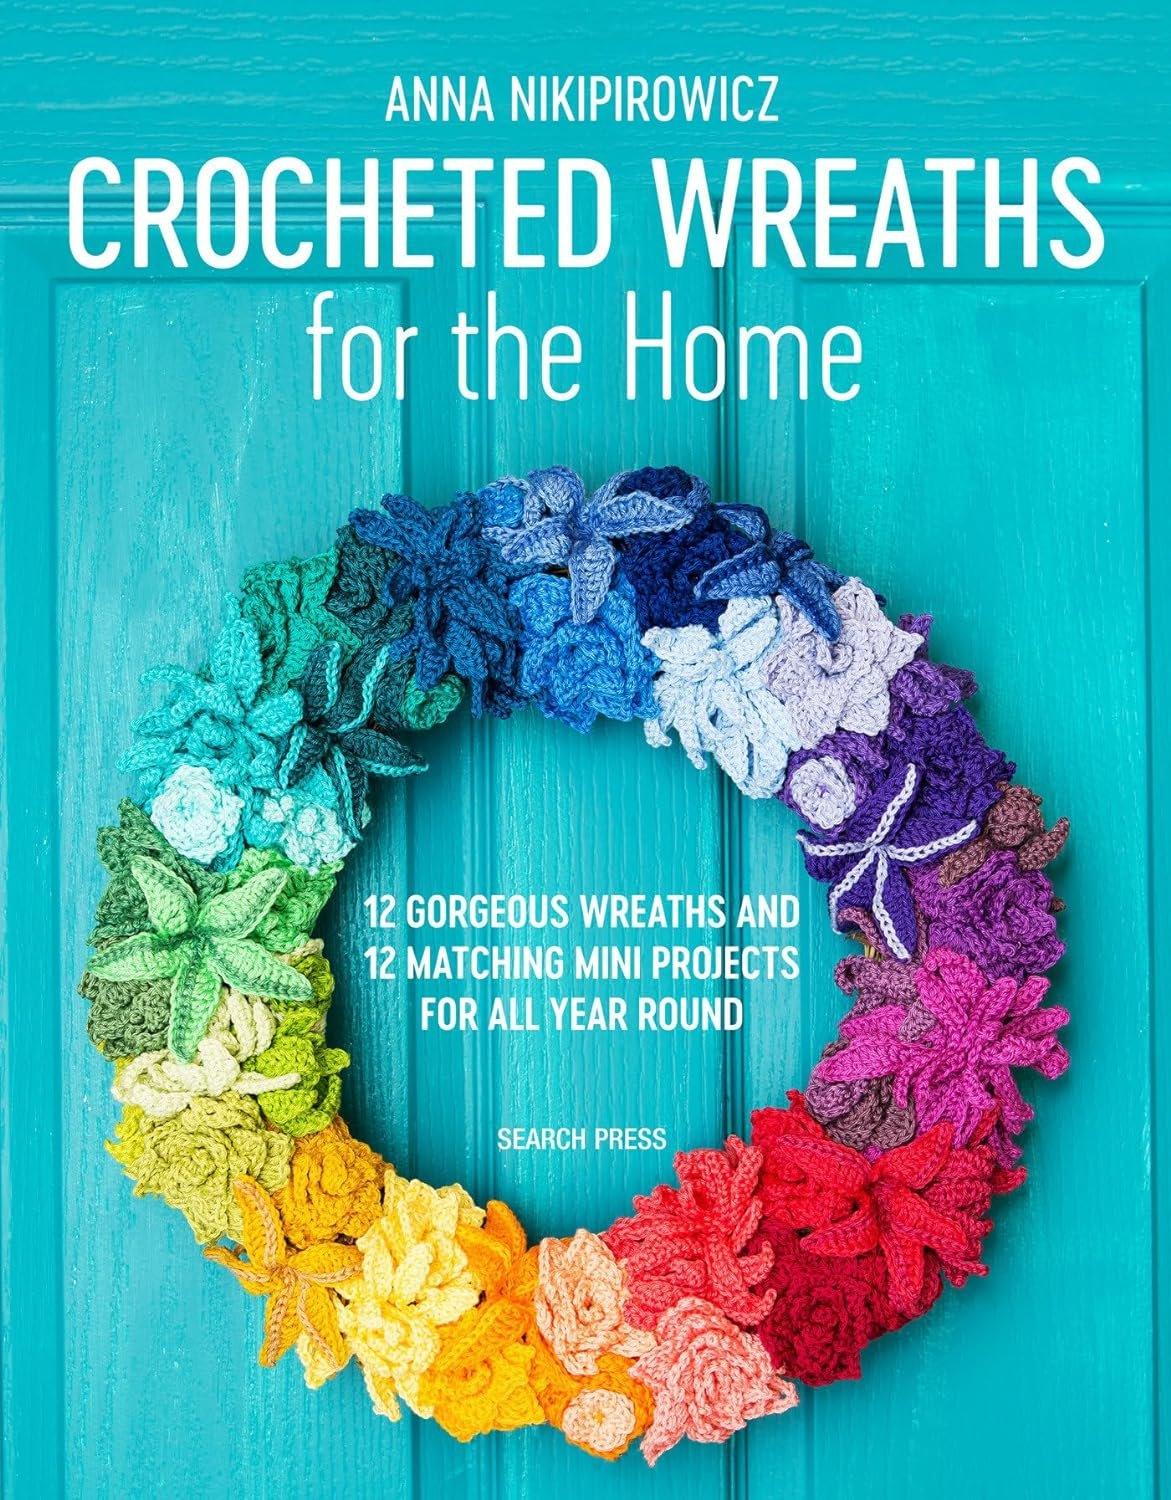 Crocheted Wreaths for the Home: 12 Gorgeous Wreaths and 12 Matching Mini Projects For All Year Round